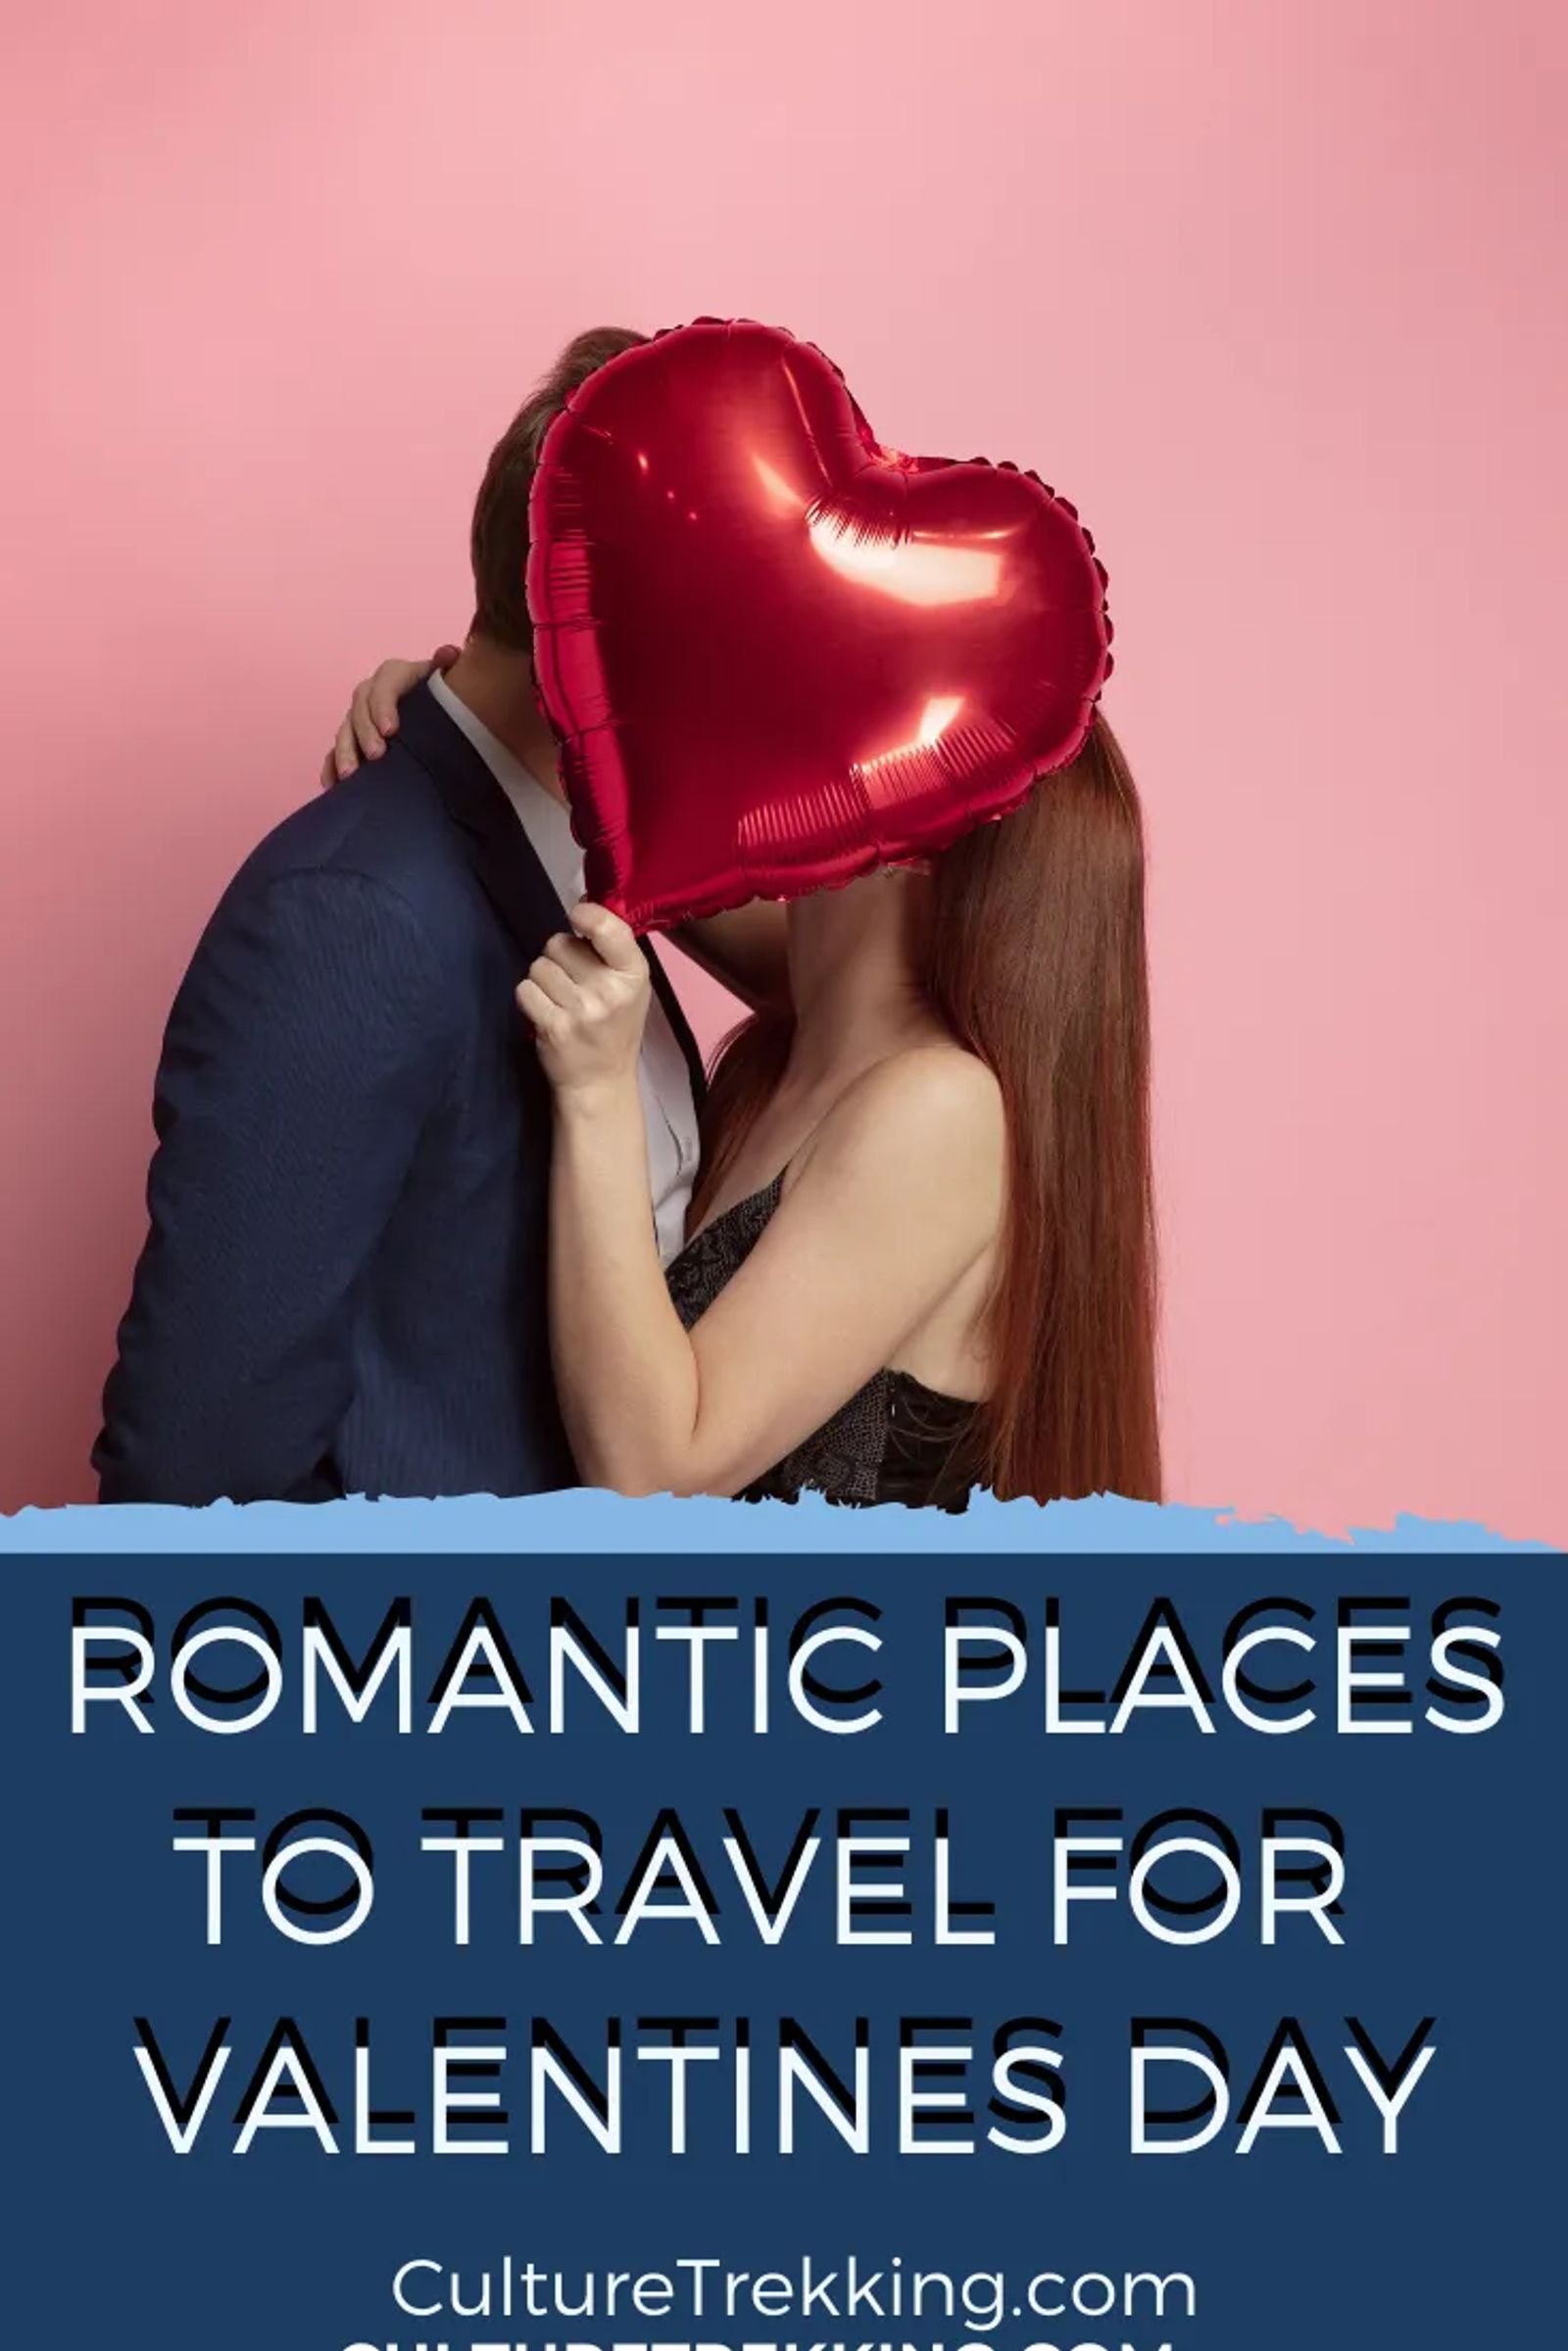 The Most Romantic Places To Go For Valentine's Day